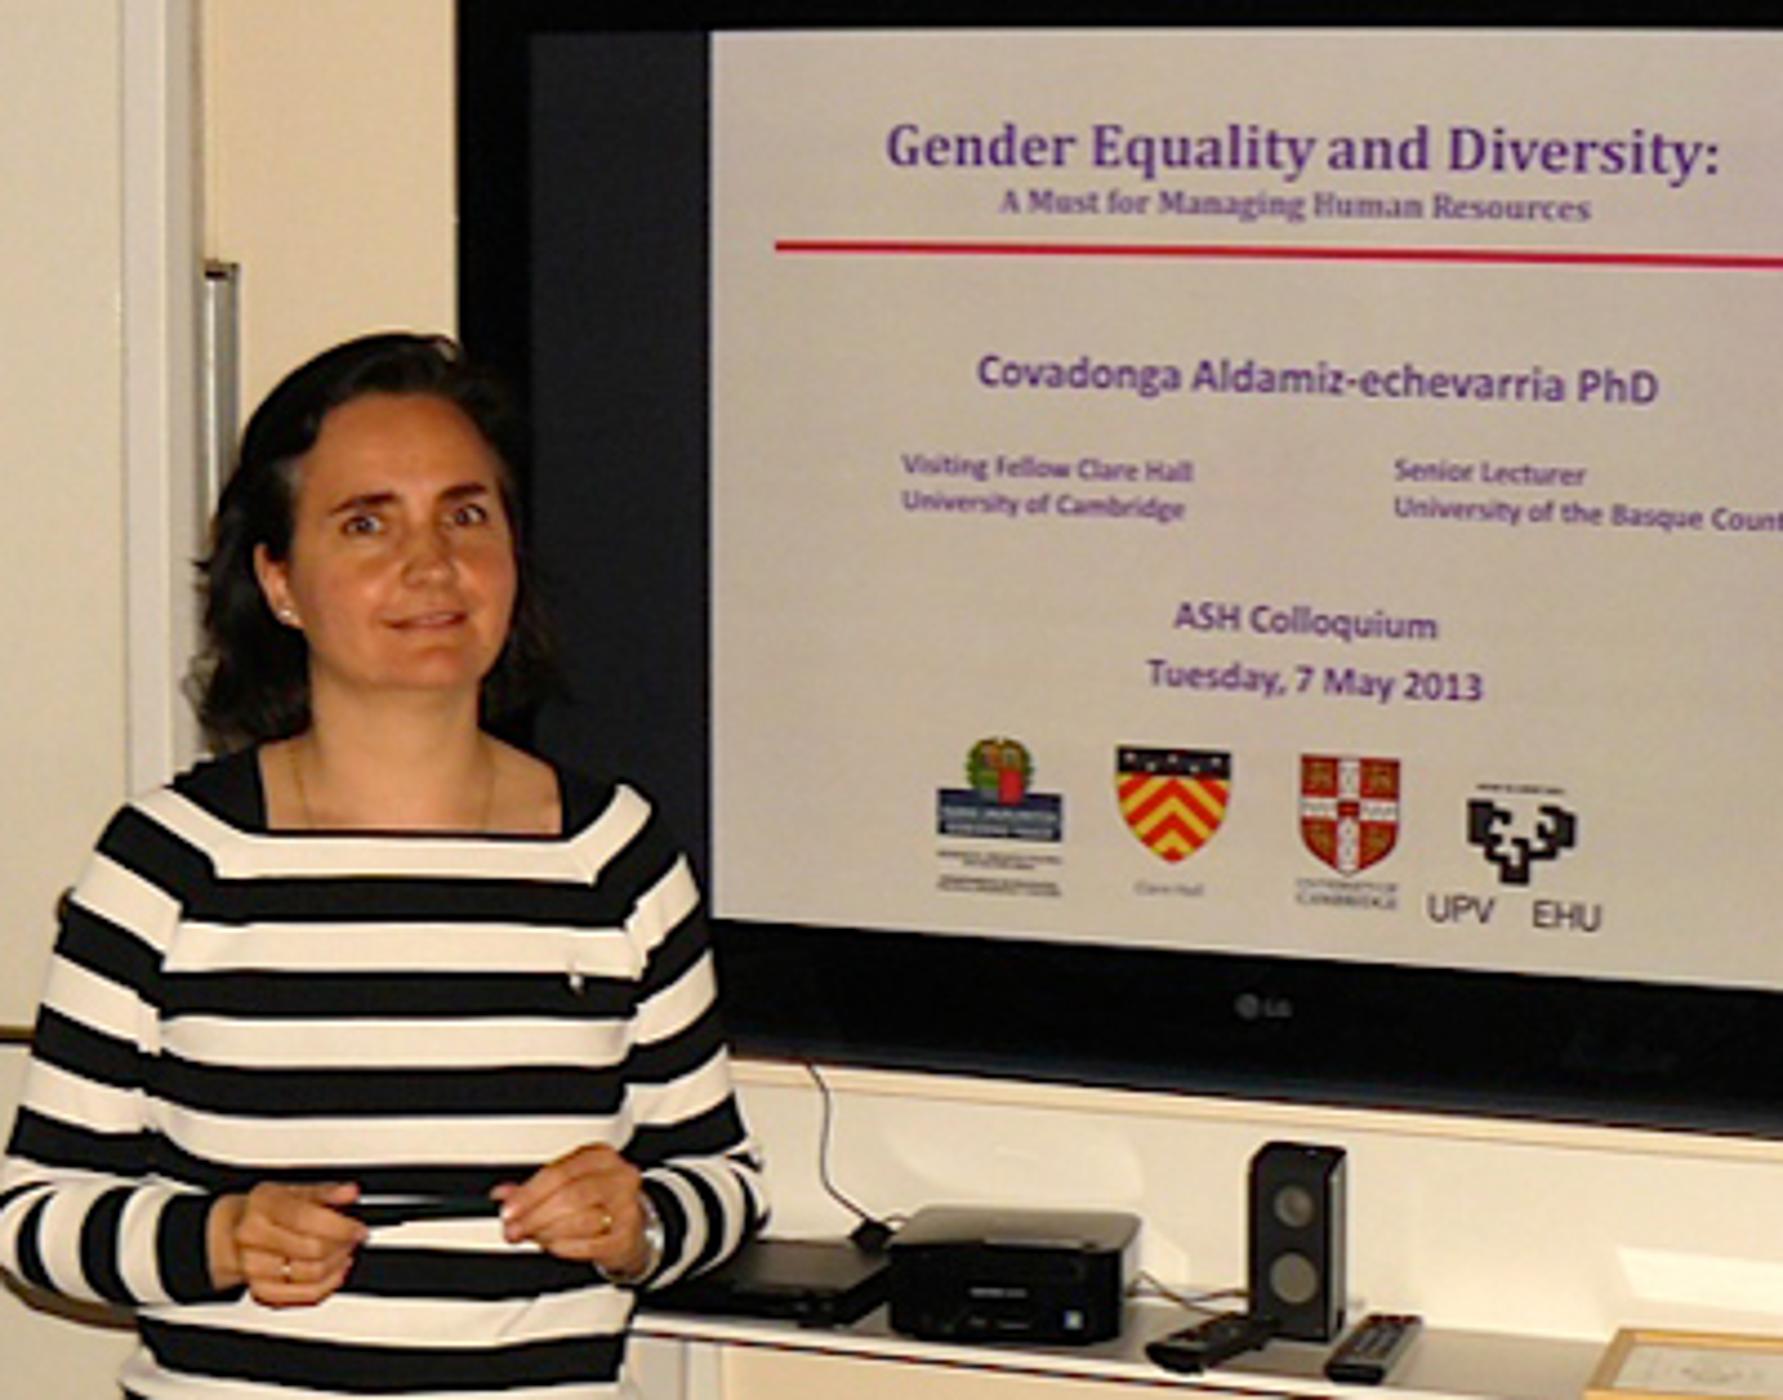 Covadonga Aldamiz-echevarria - Gender Equality and Diversity: a must for managing Human Resources